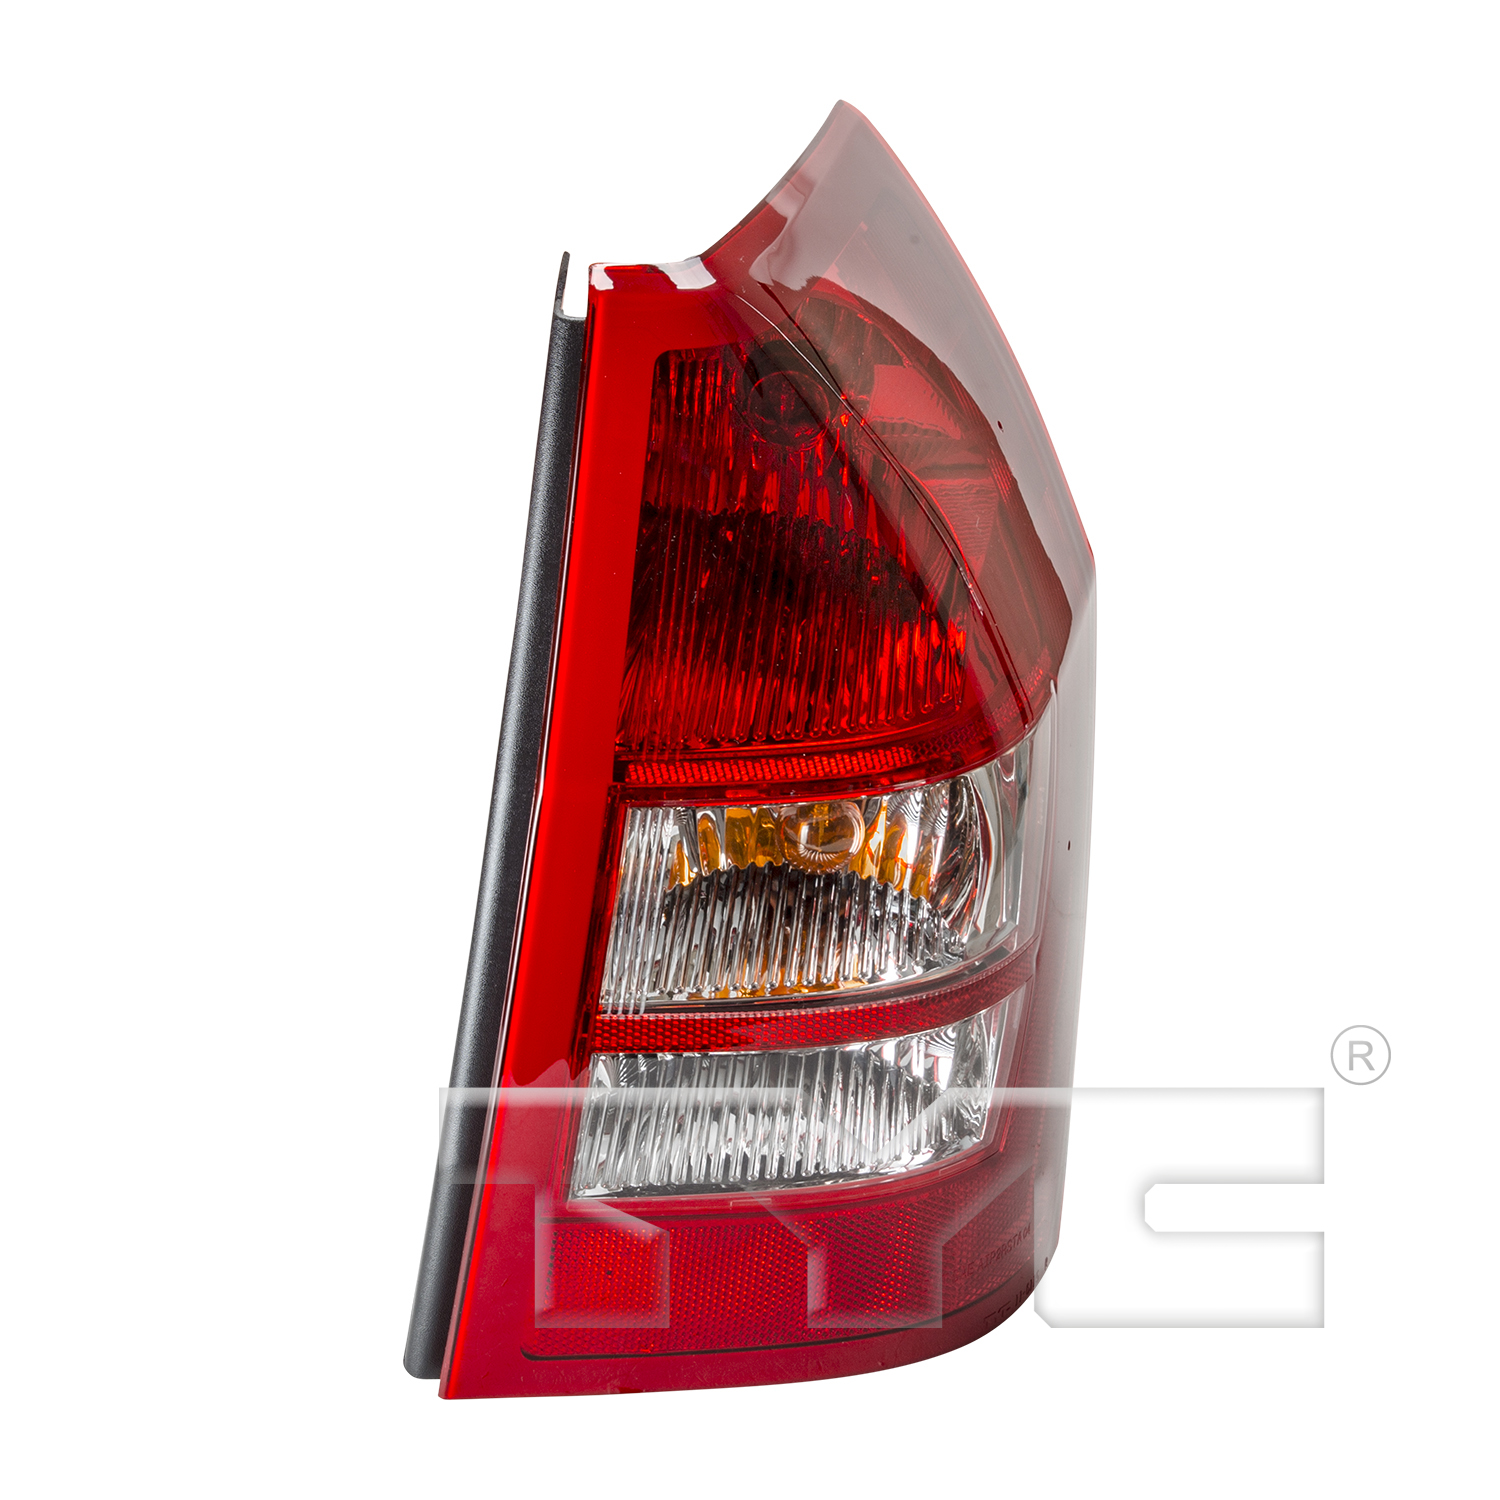 Aftermarket TAILLIGHTS for DODGE - MAGNUM, MAGNUM,05-05,RT Taillamp assy